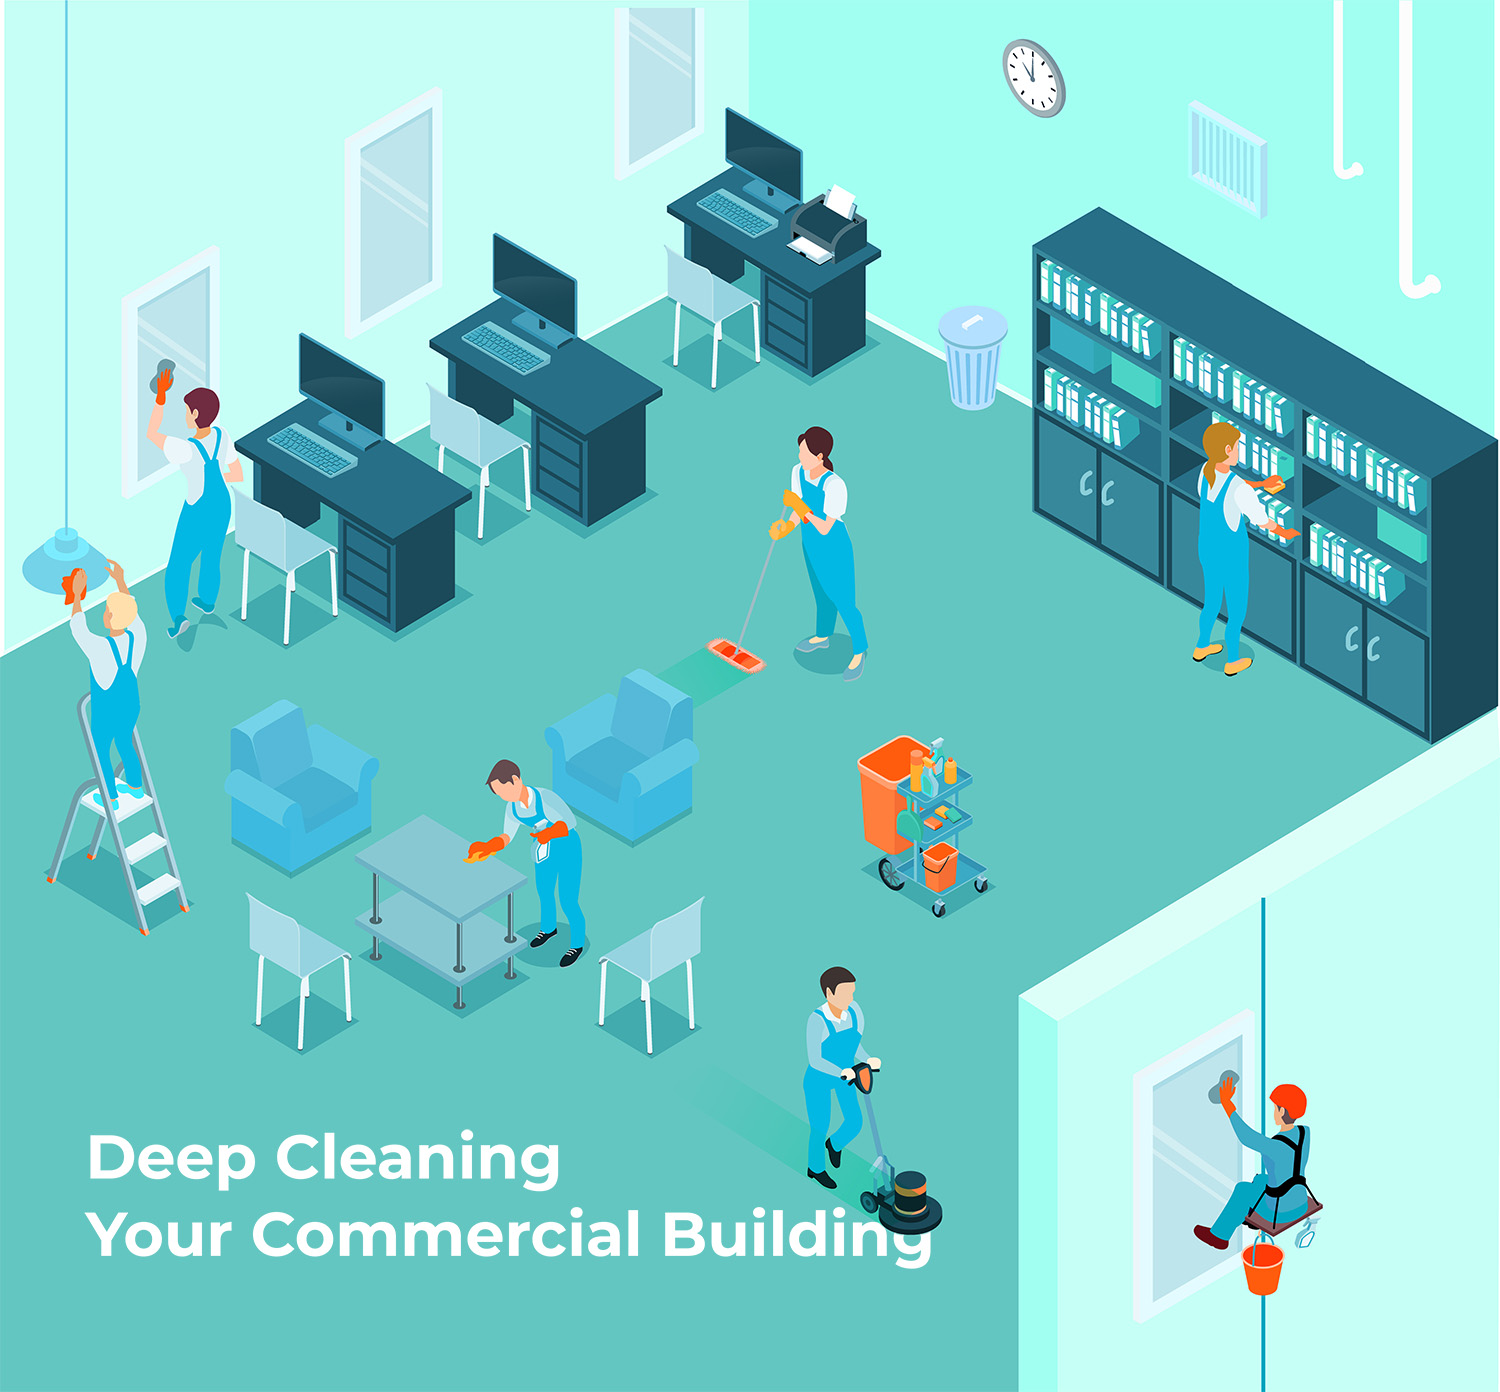 https://www.maintenance-one.com/wp-content/uploads/2022/04/deep-cleaning-your-commercial-office-building.jpg